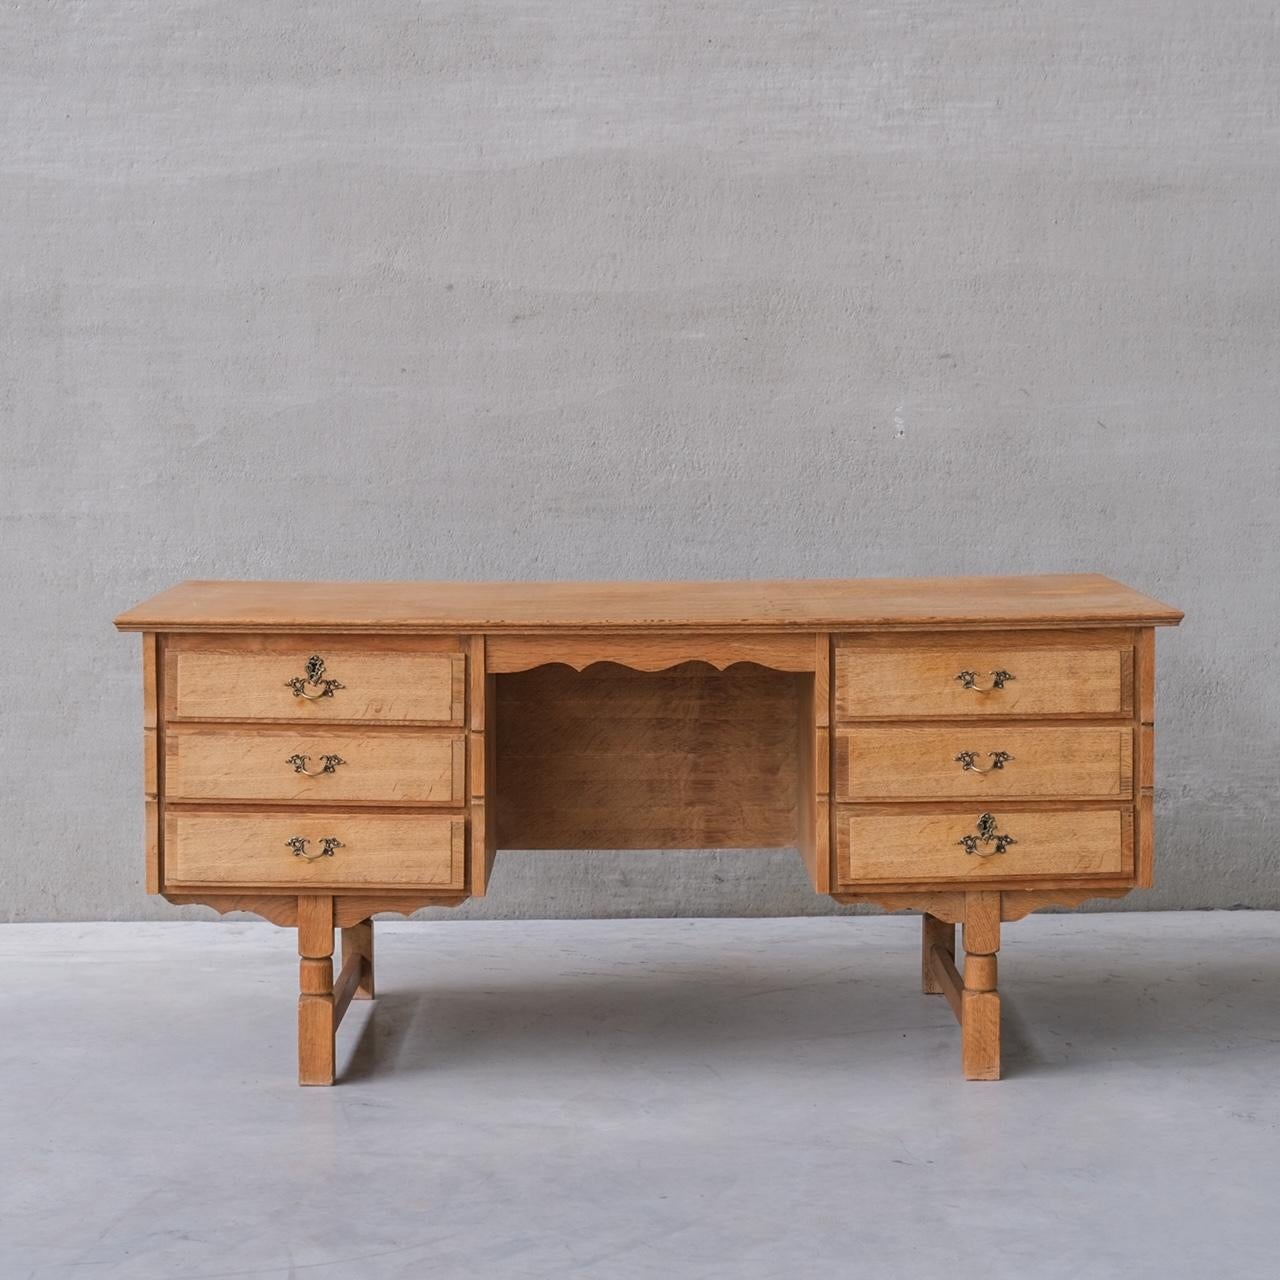 A good looking simple desk, in oak, with reverse shelf for displaying books or curios.

Denmark, circa 1960s.

Attributed to Henning Kjaernulf.

Good vintage condition. Some scuffs and patina commensurate with age.

Location: Belgium